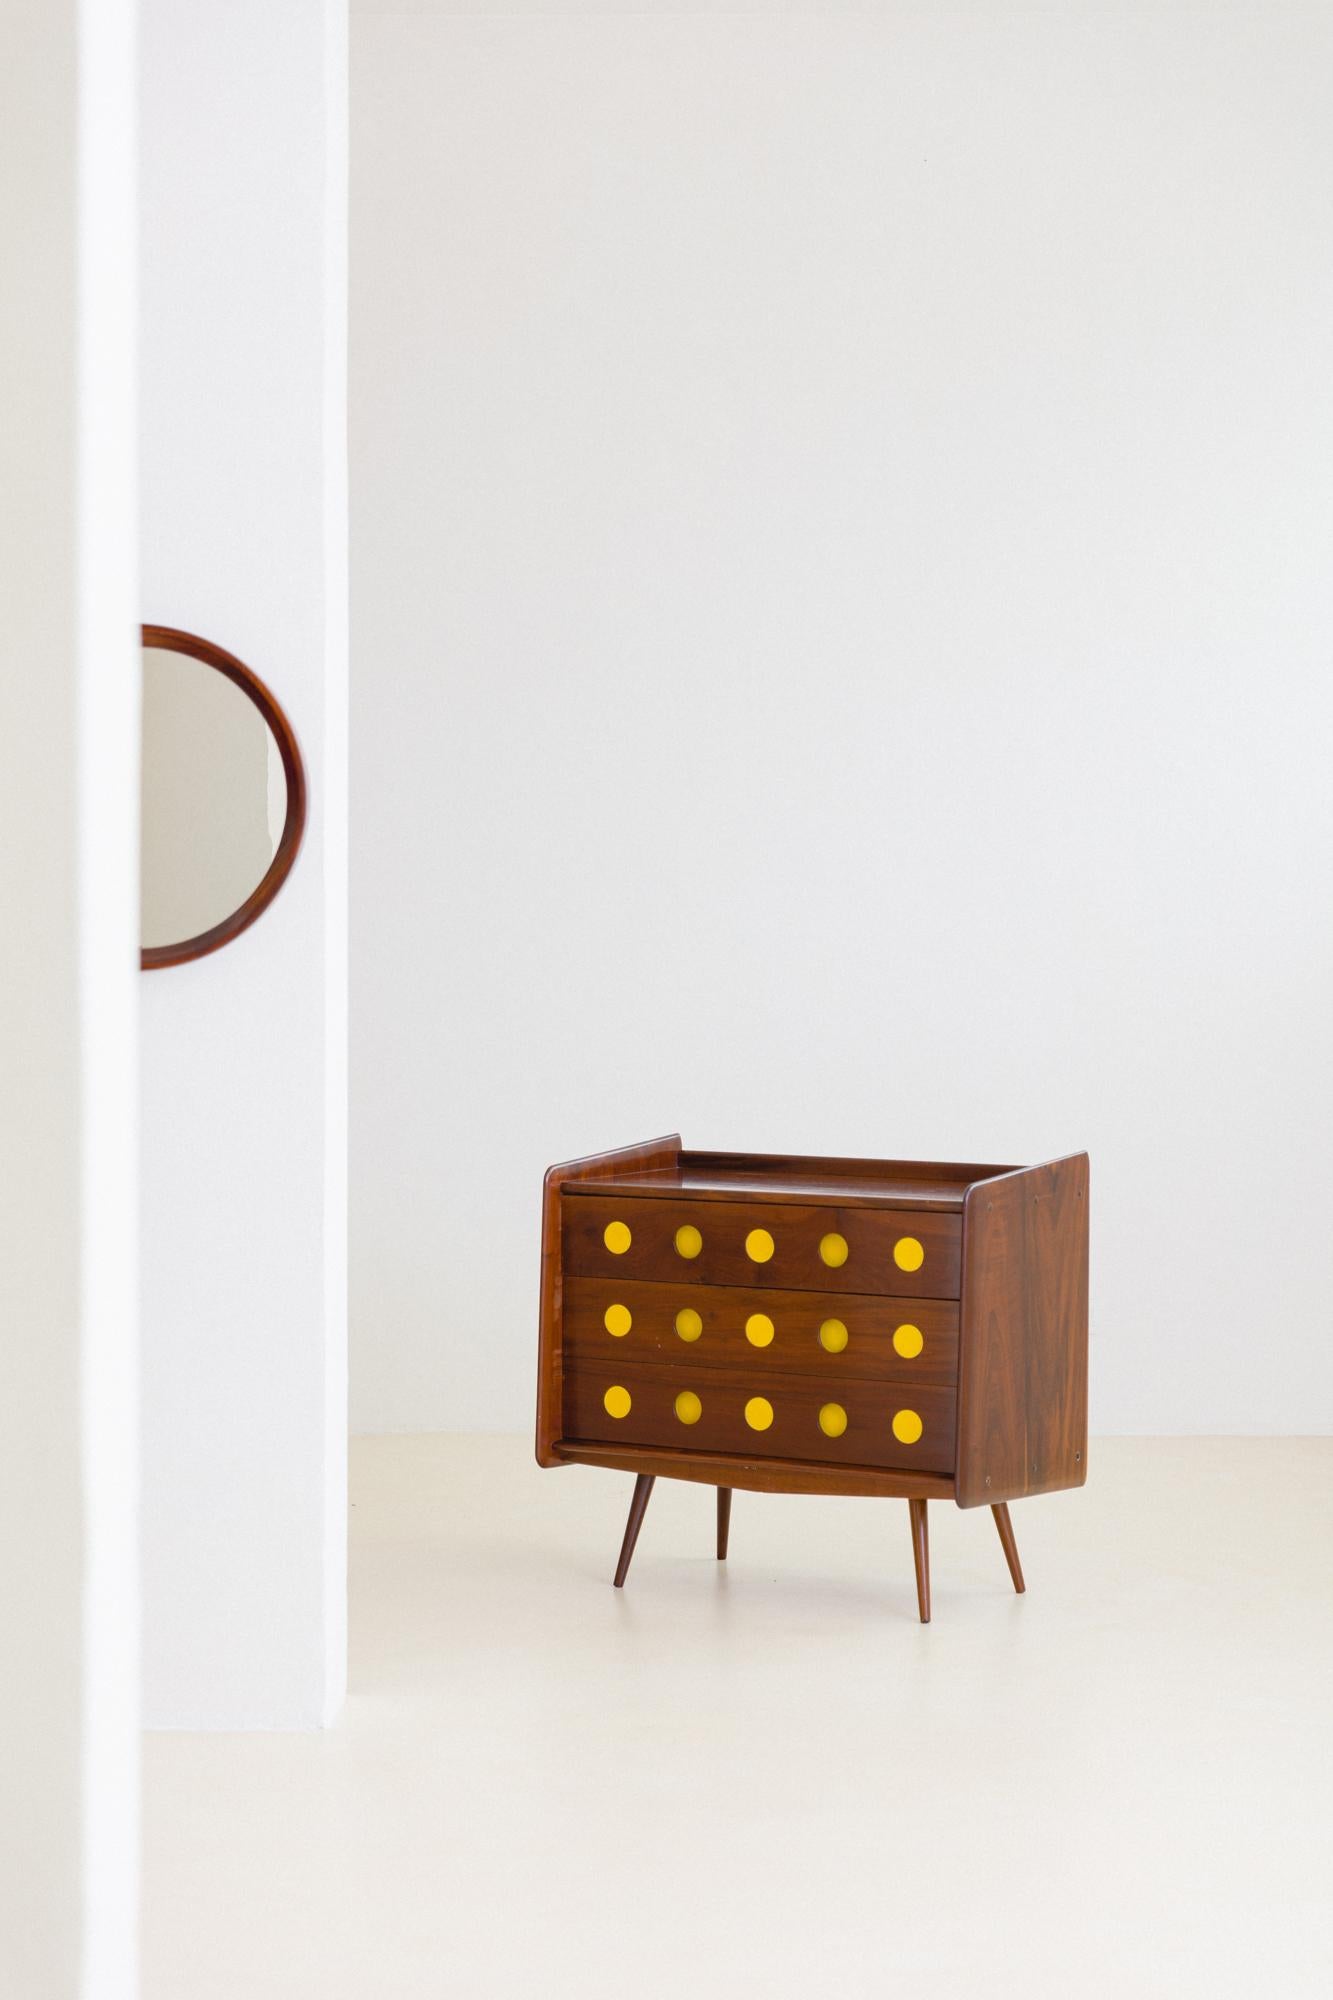 This dresser with three drawers made of solid Imbuia with details in yellow leather is an example of the ludic furniture produced by Móveis Cimo in the 1950s. Initially thought of as part of a children and youth's room collection, the dresser was